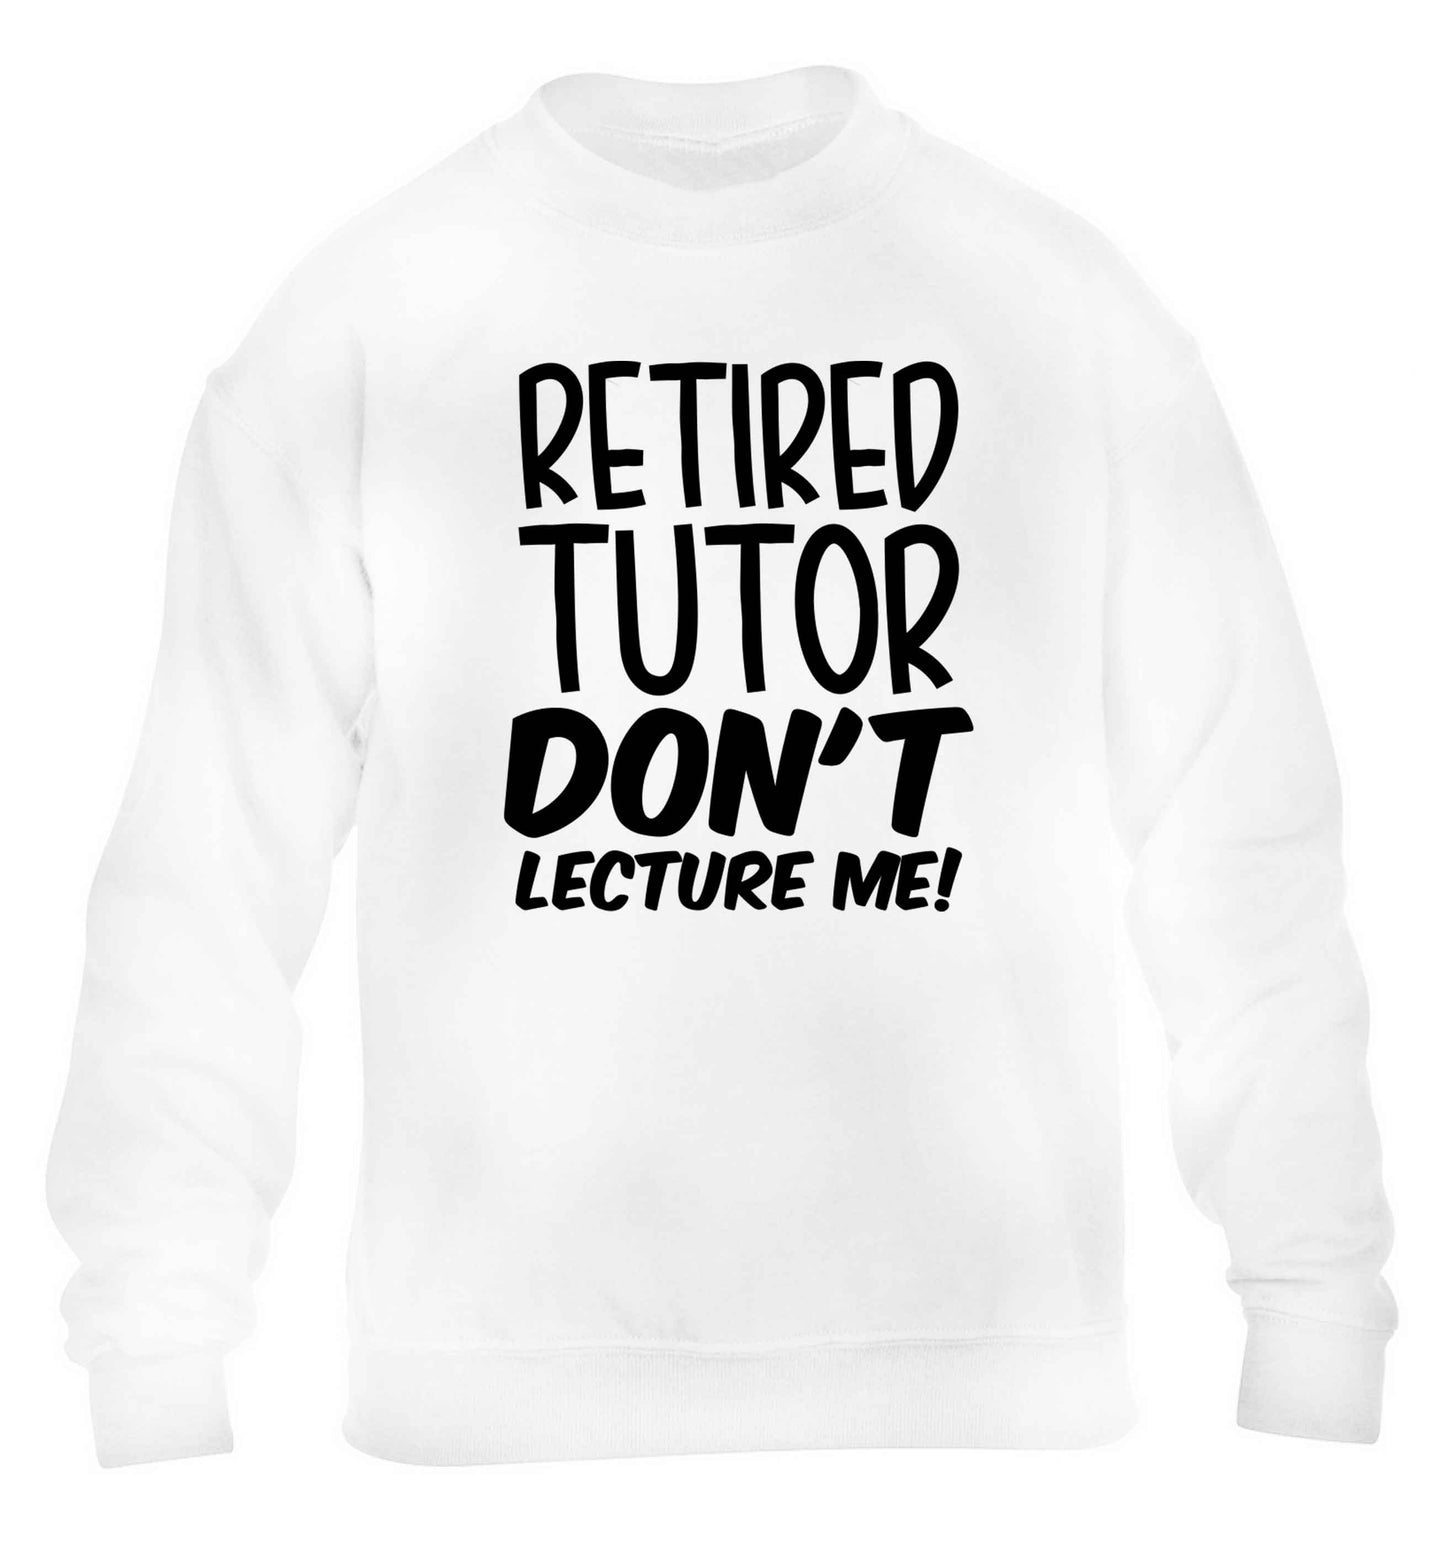 Retired tutor don't lecture me! children's white sweater 12-13 Years